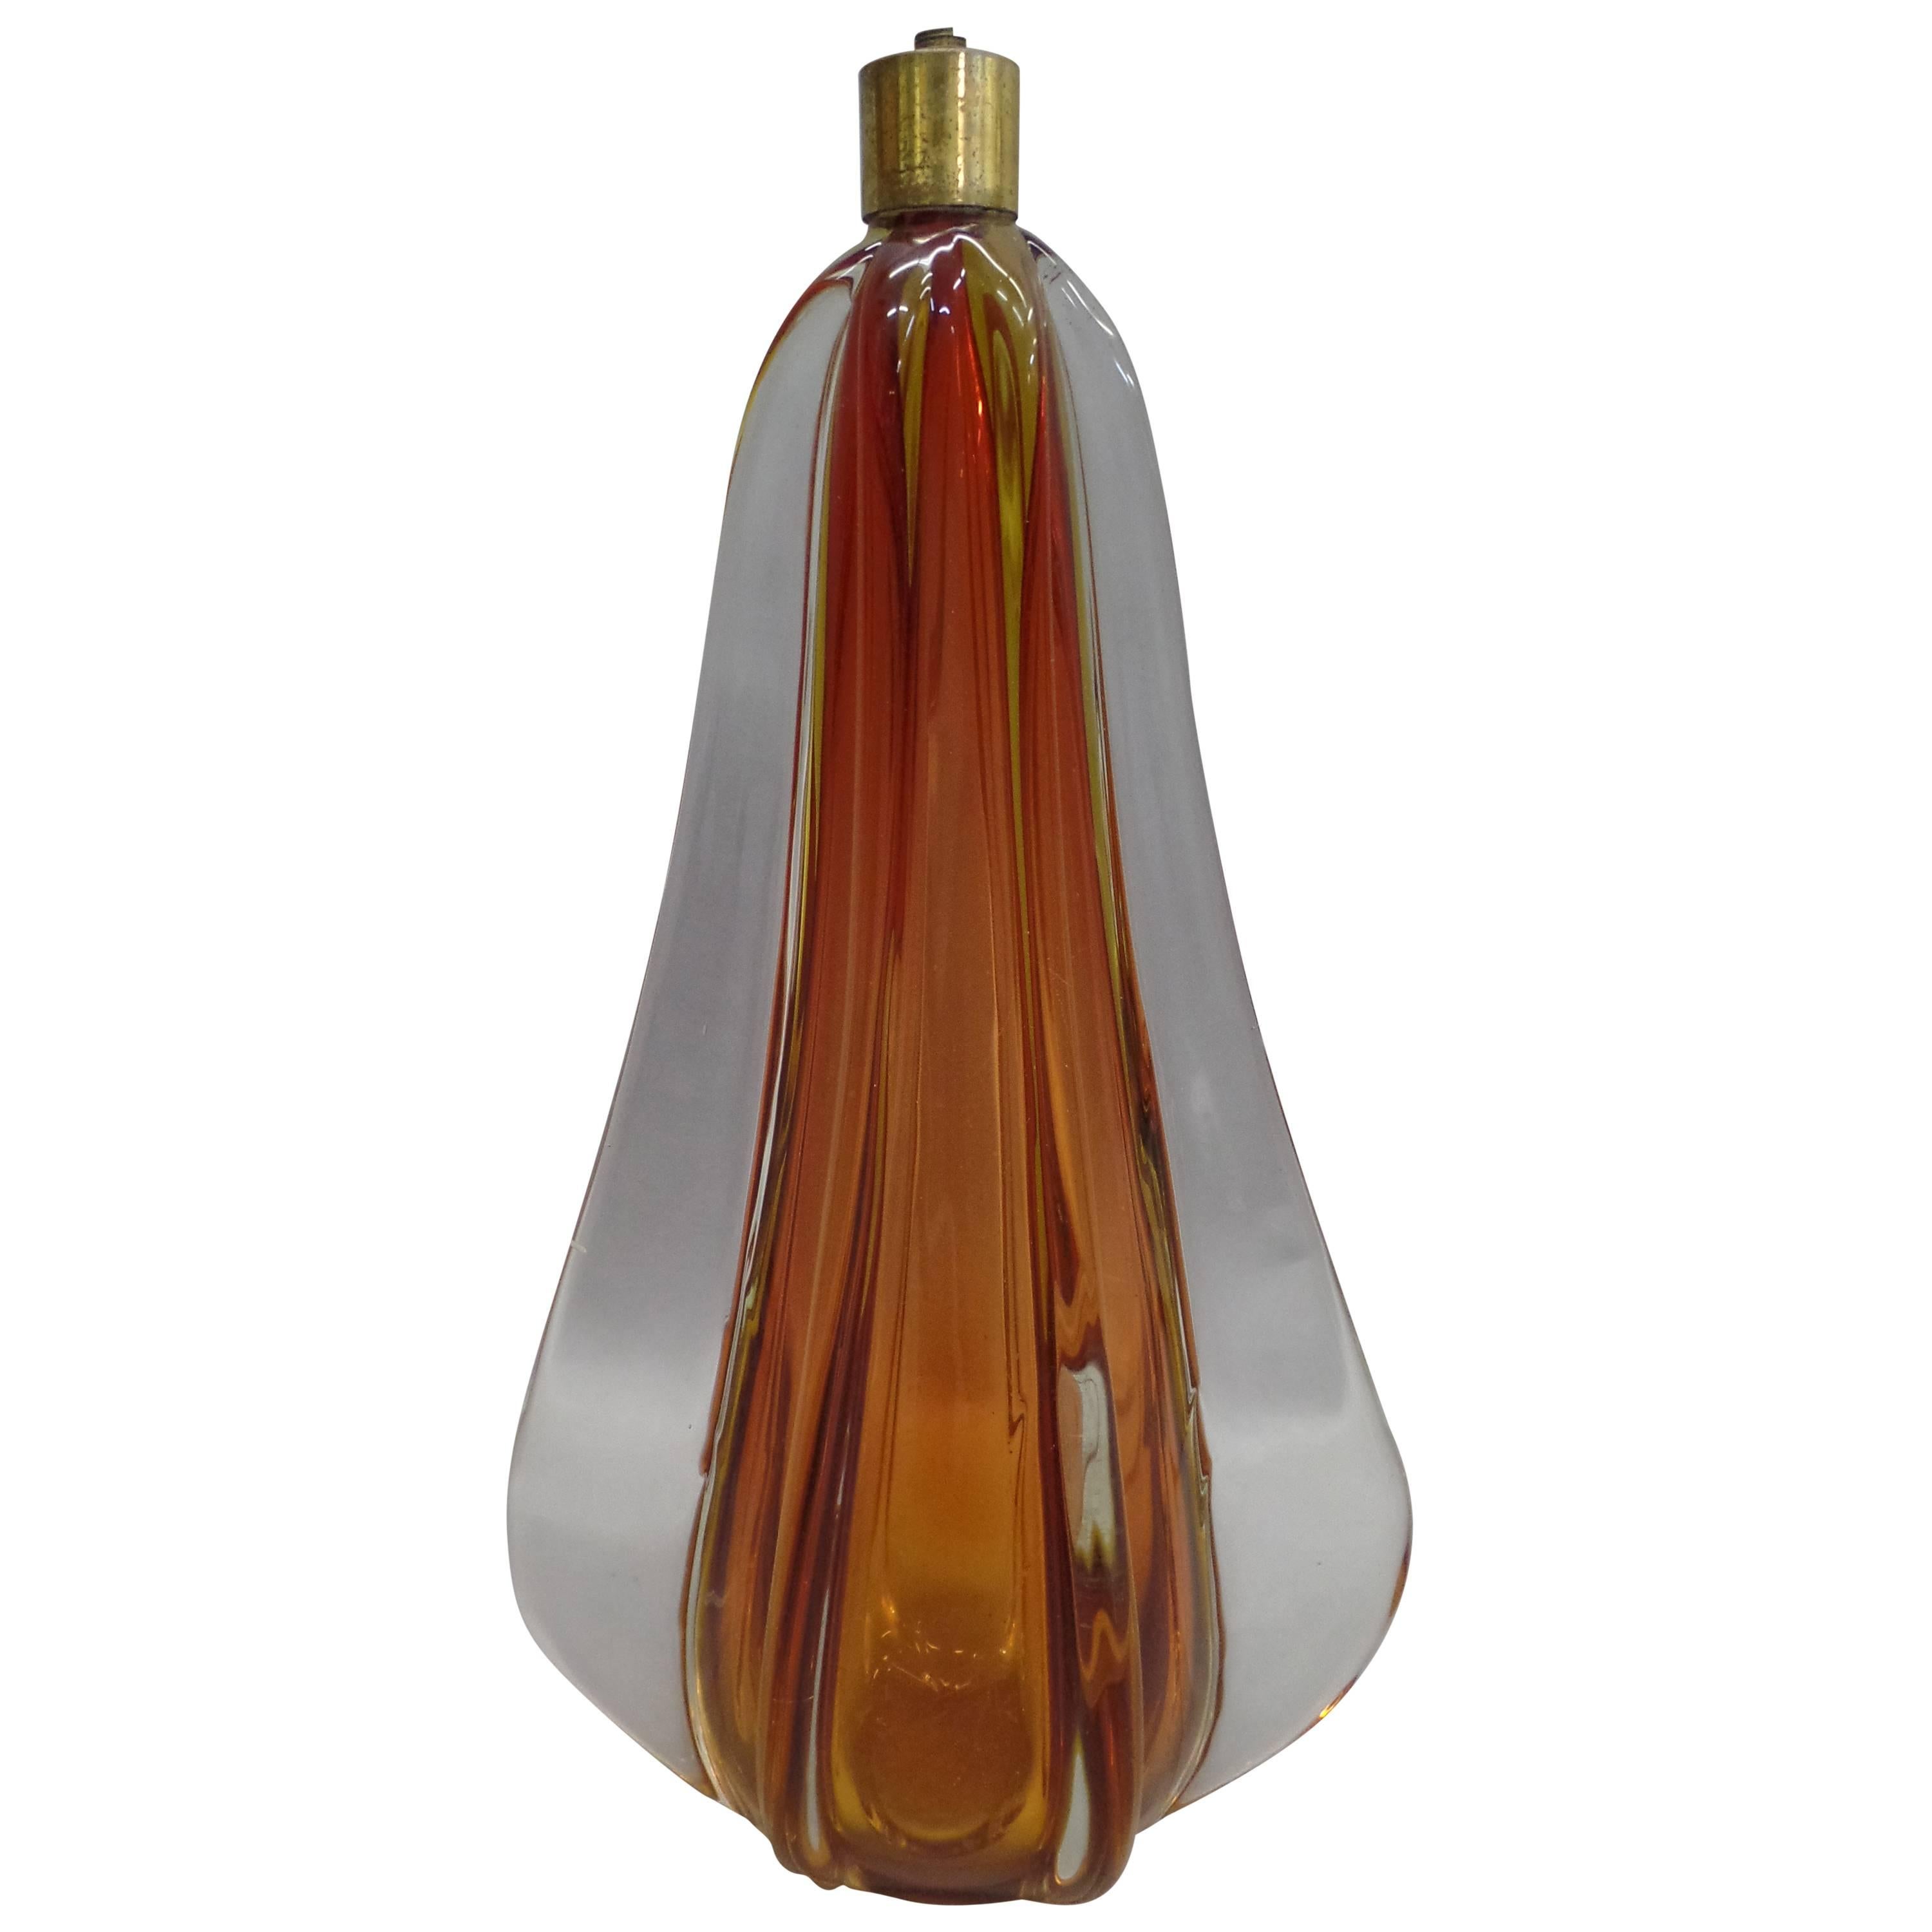 Handblown Italian, Mid-Century Modern table lamp base by Seguso, ribbed and tapered in amber and clear glass.

Elegant and an excellent example of Italian mixture of art and design in a functional object.